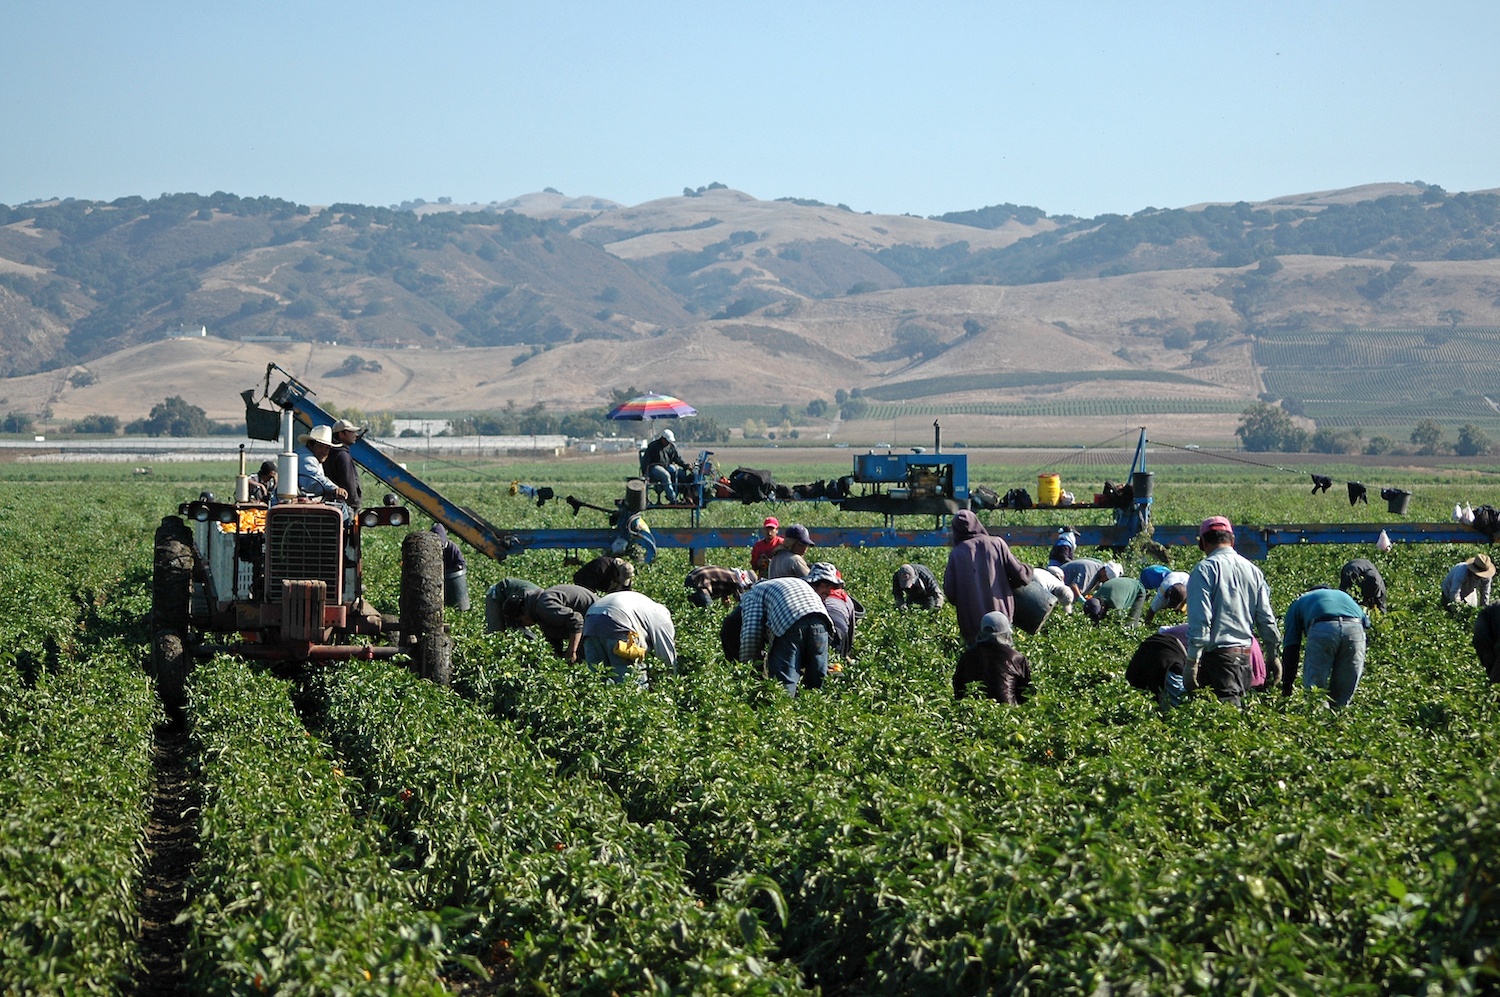 Farm workers harvesting yellow bell peppers near Gilroy, California. November 2020